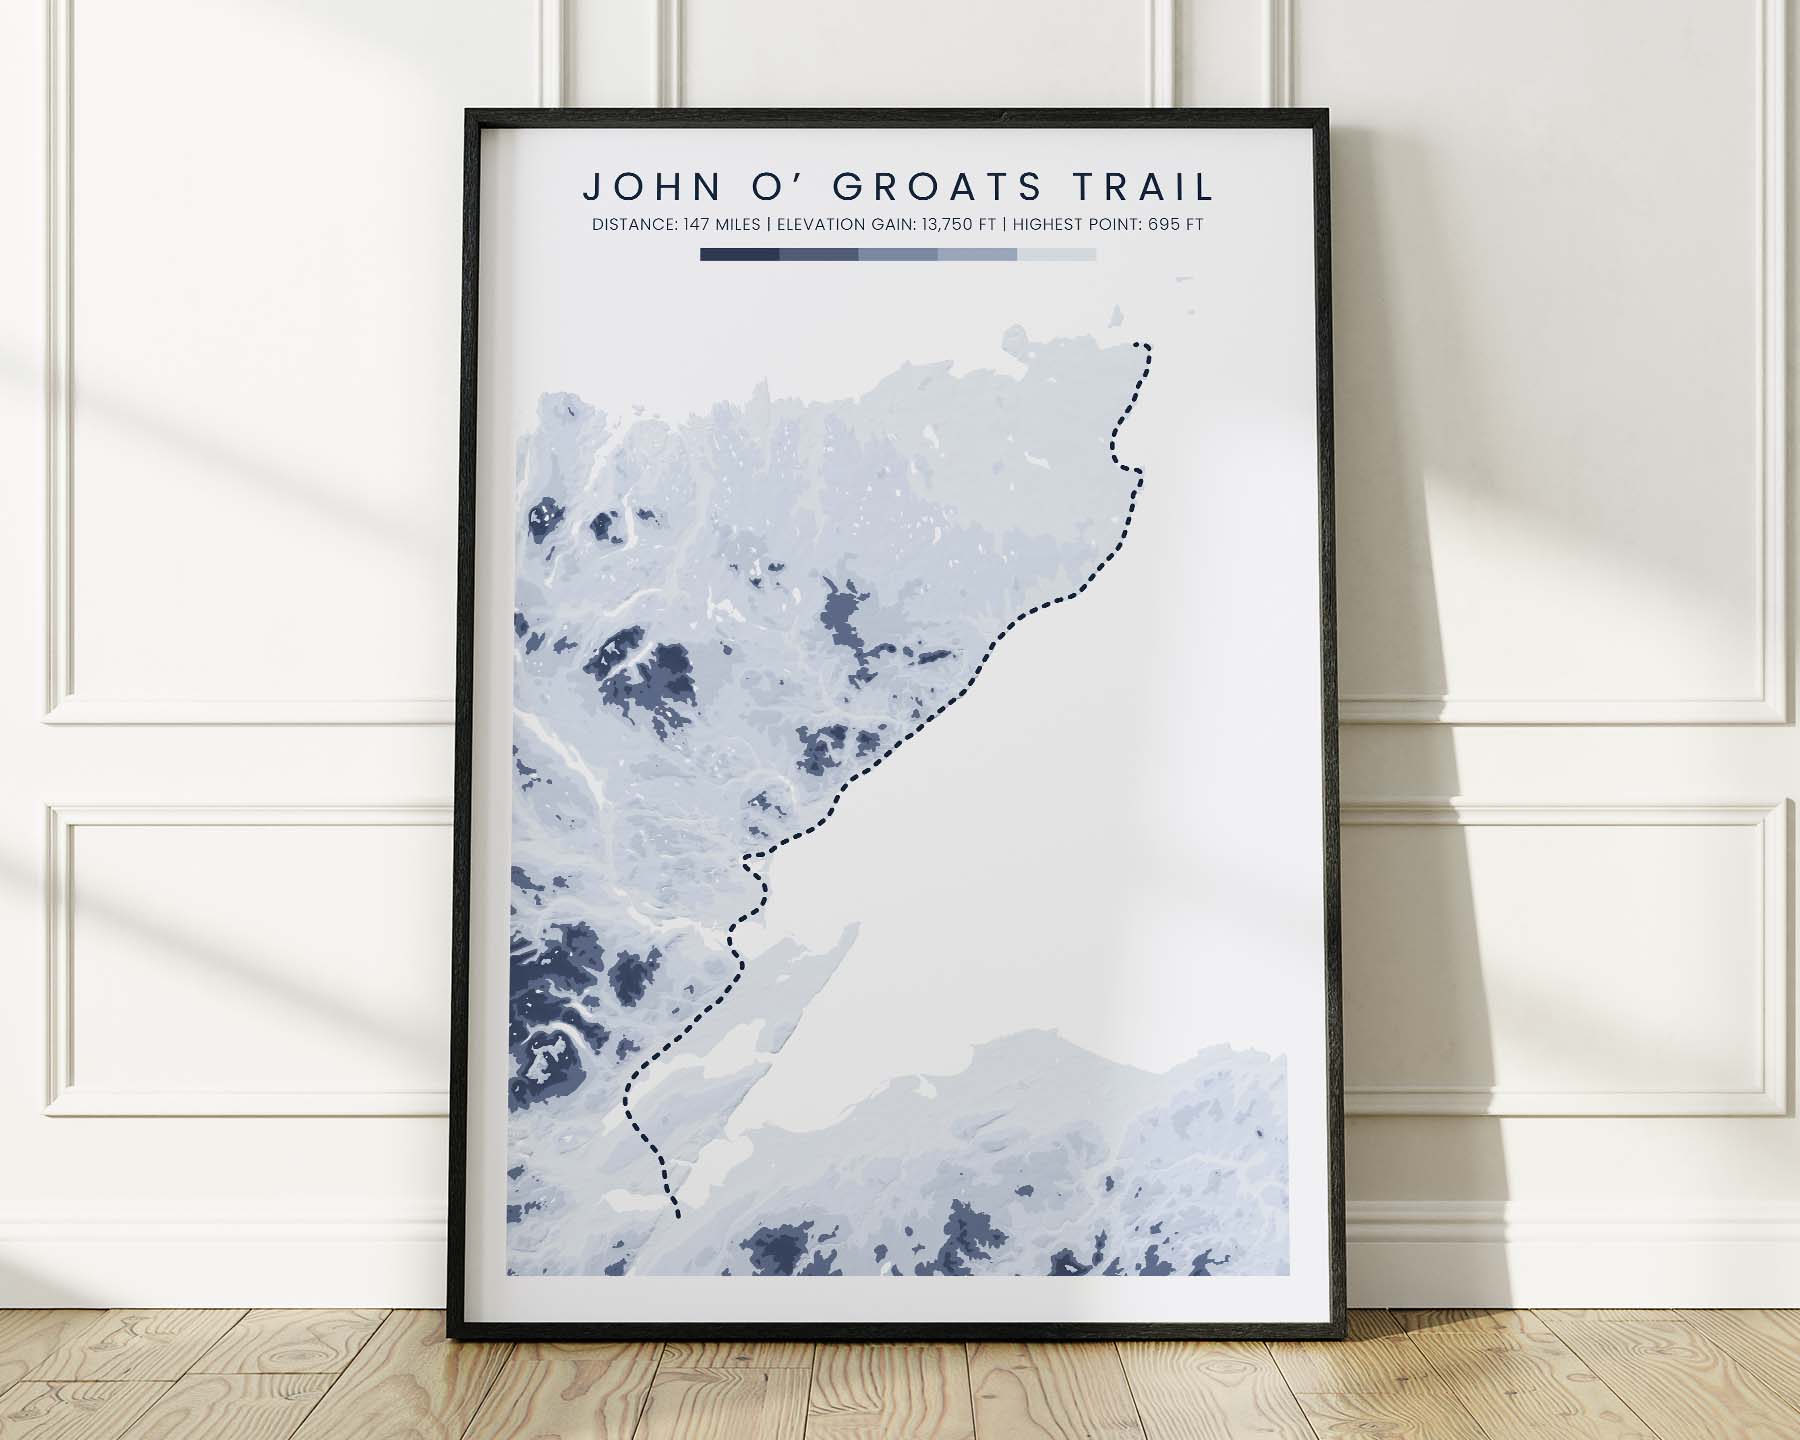 John O' Groats Trail (Scottish Highlands) Hike Poster with Minimal Blue Background in Modern Room Decor